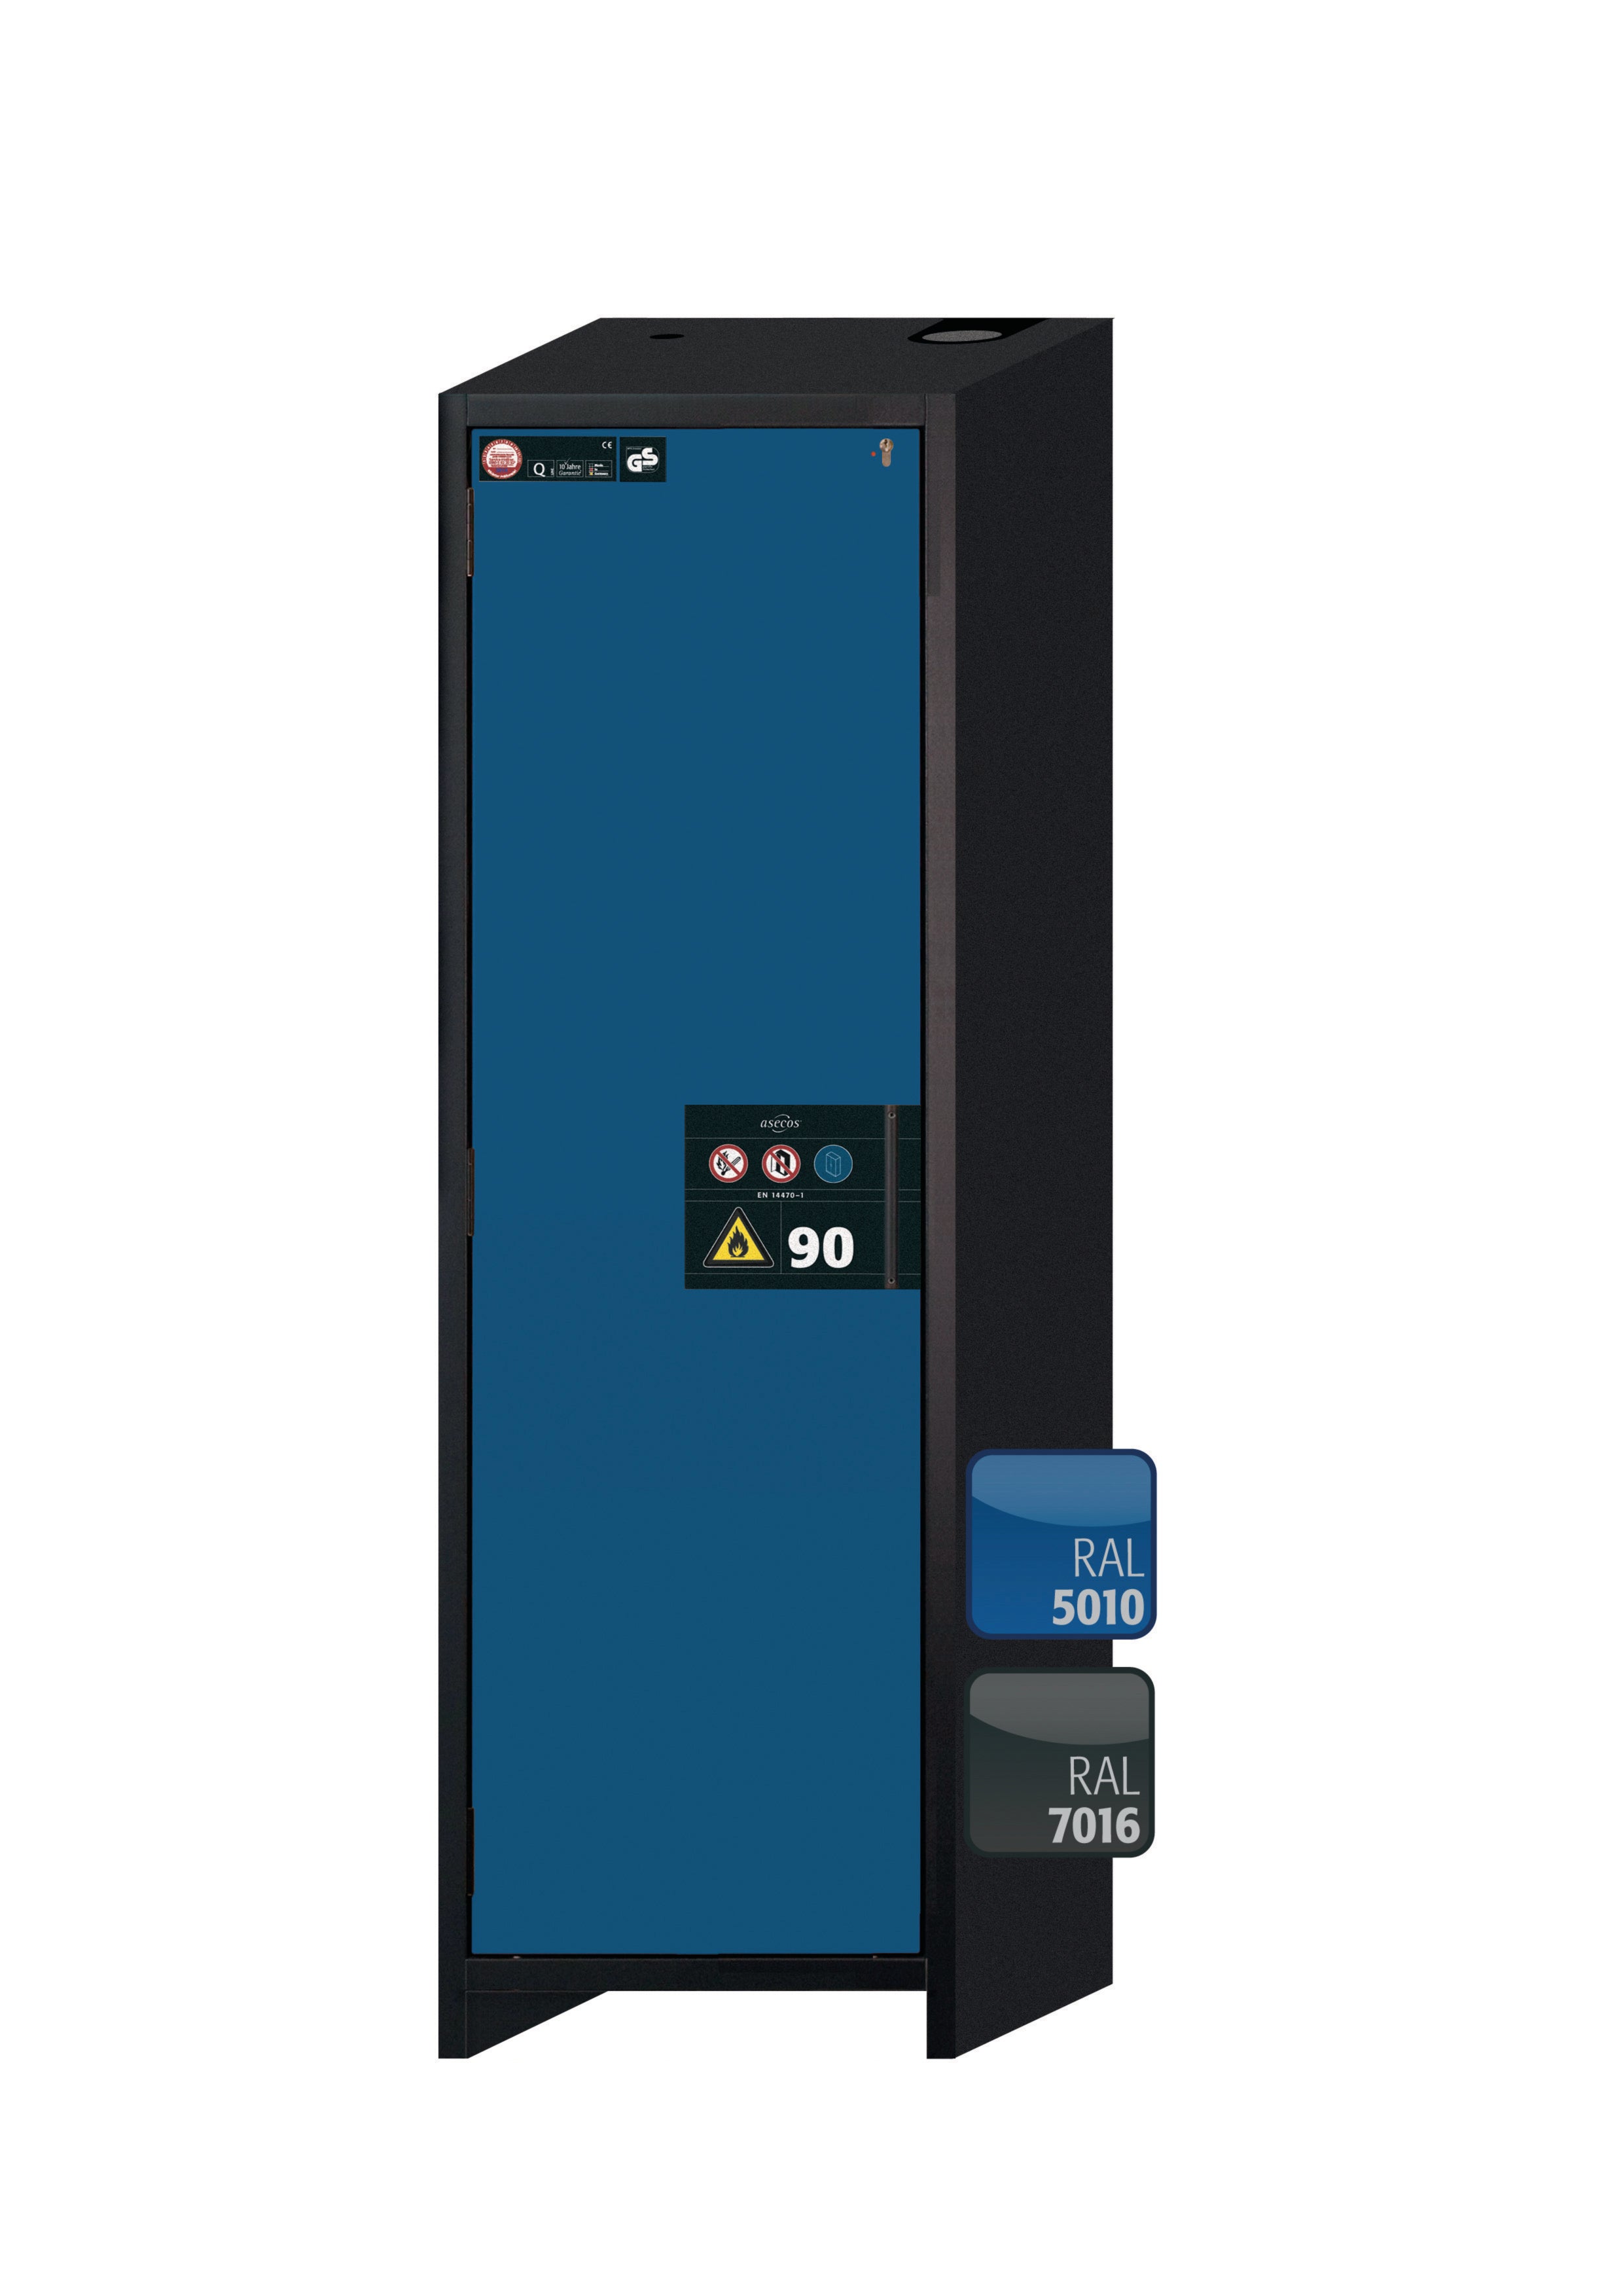 Type 90 safety storage cabinet Q-PEGASUS-90 model Q90.195.060.WDAC in gentian blue RAL 5010 with 2x shelf standard (stainless steel 1.4301),